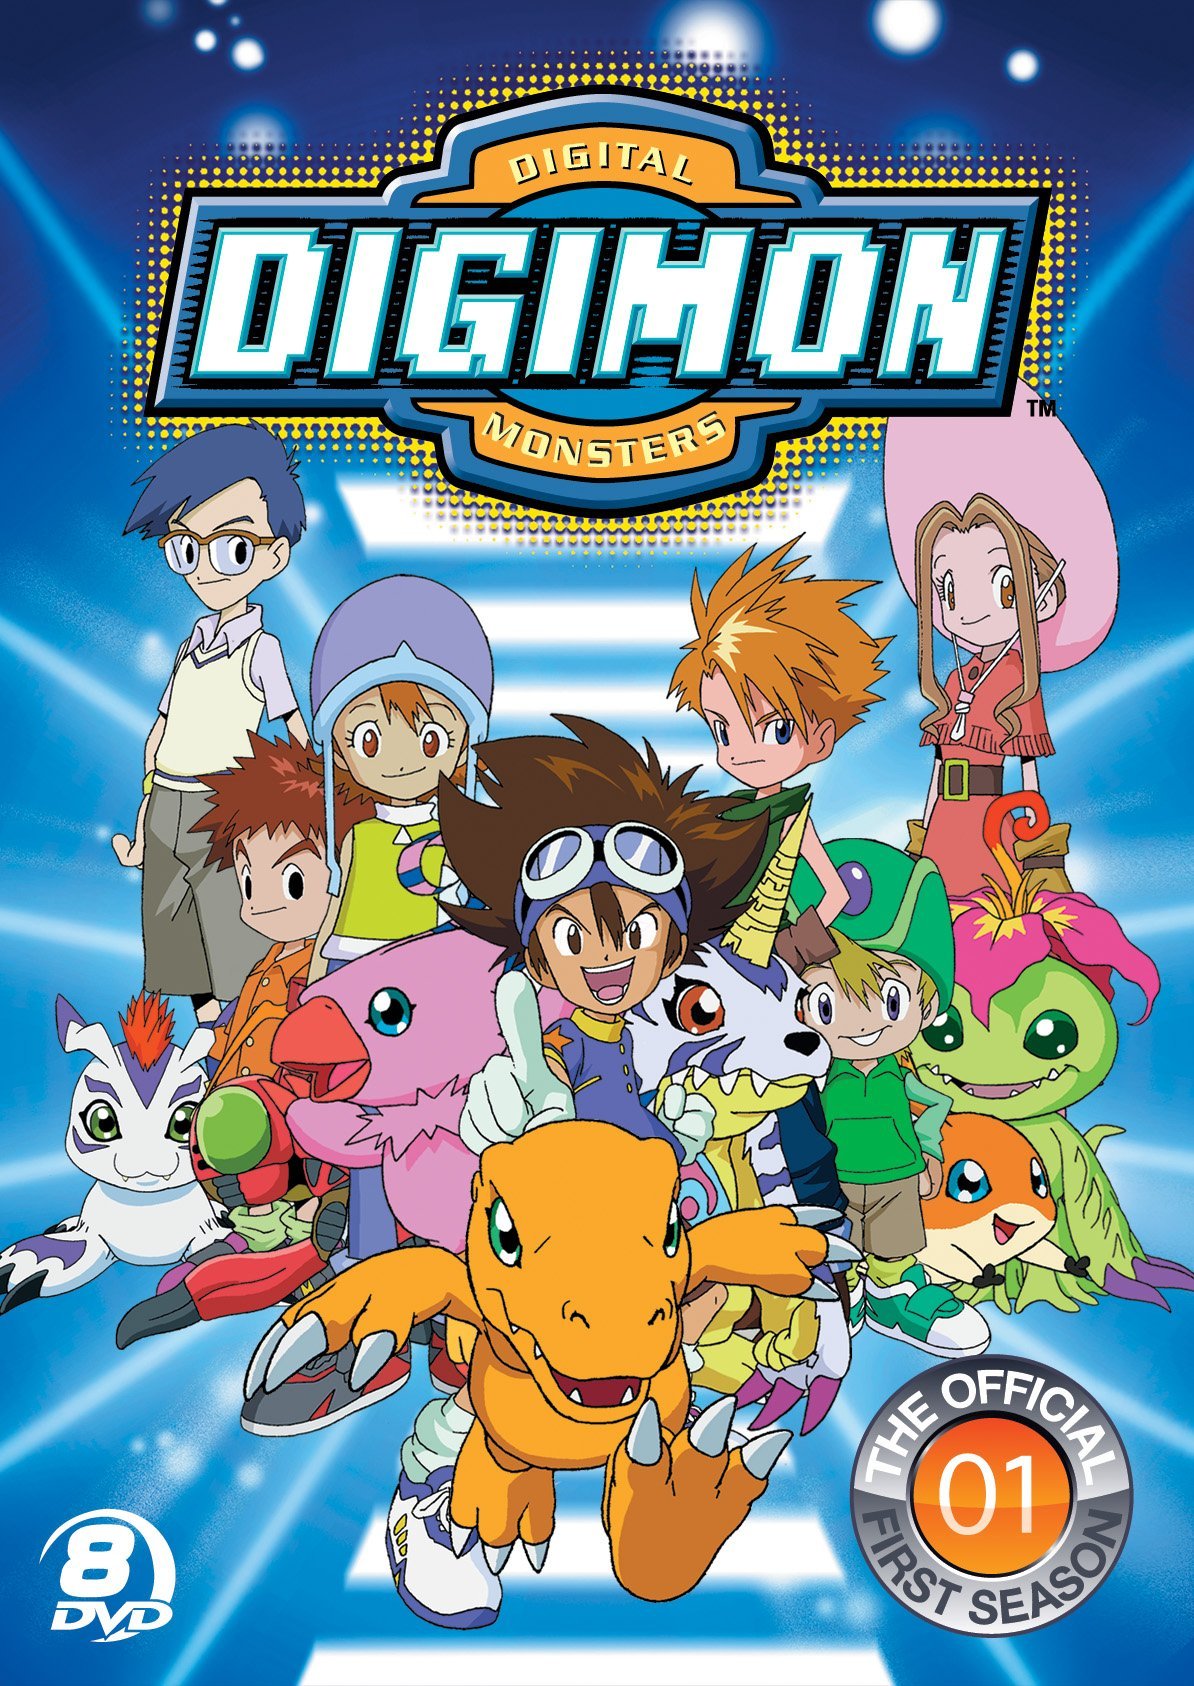 Digimon: The DigiDestined Crown Their New Leader